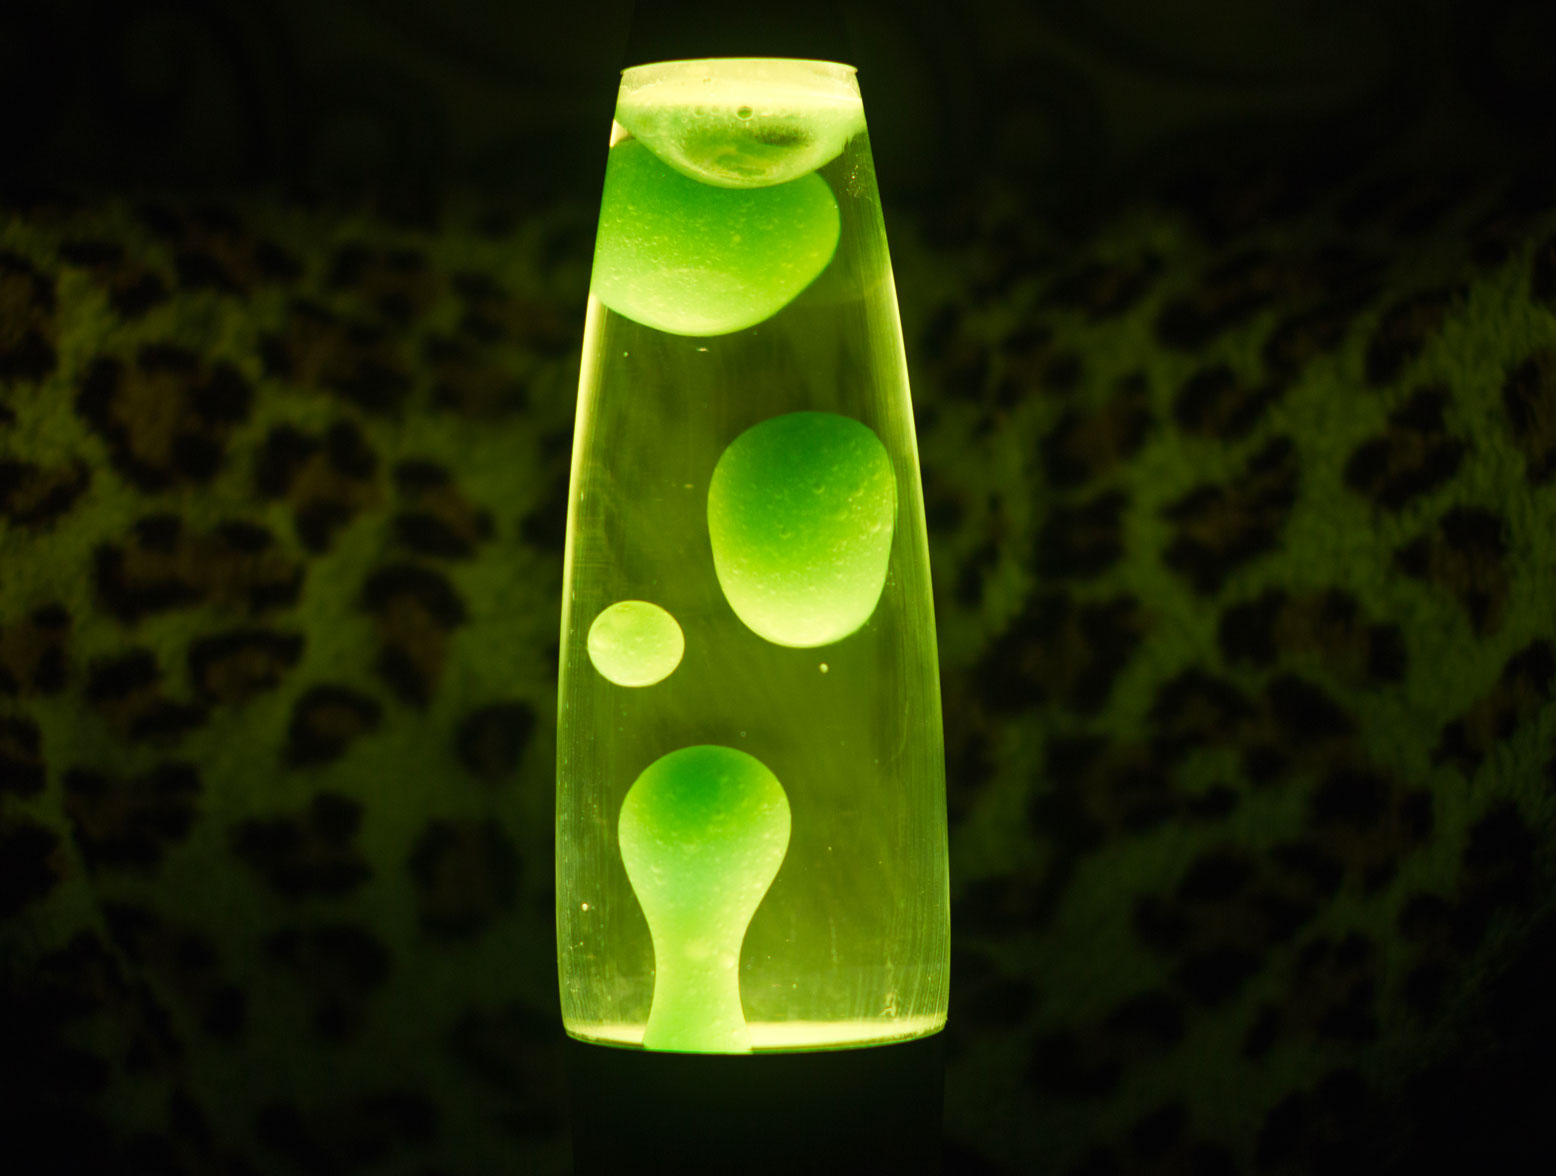 Woman Attacks Her ExGirlfriend With Lava Lamp